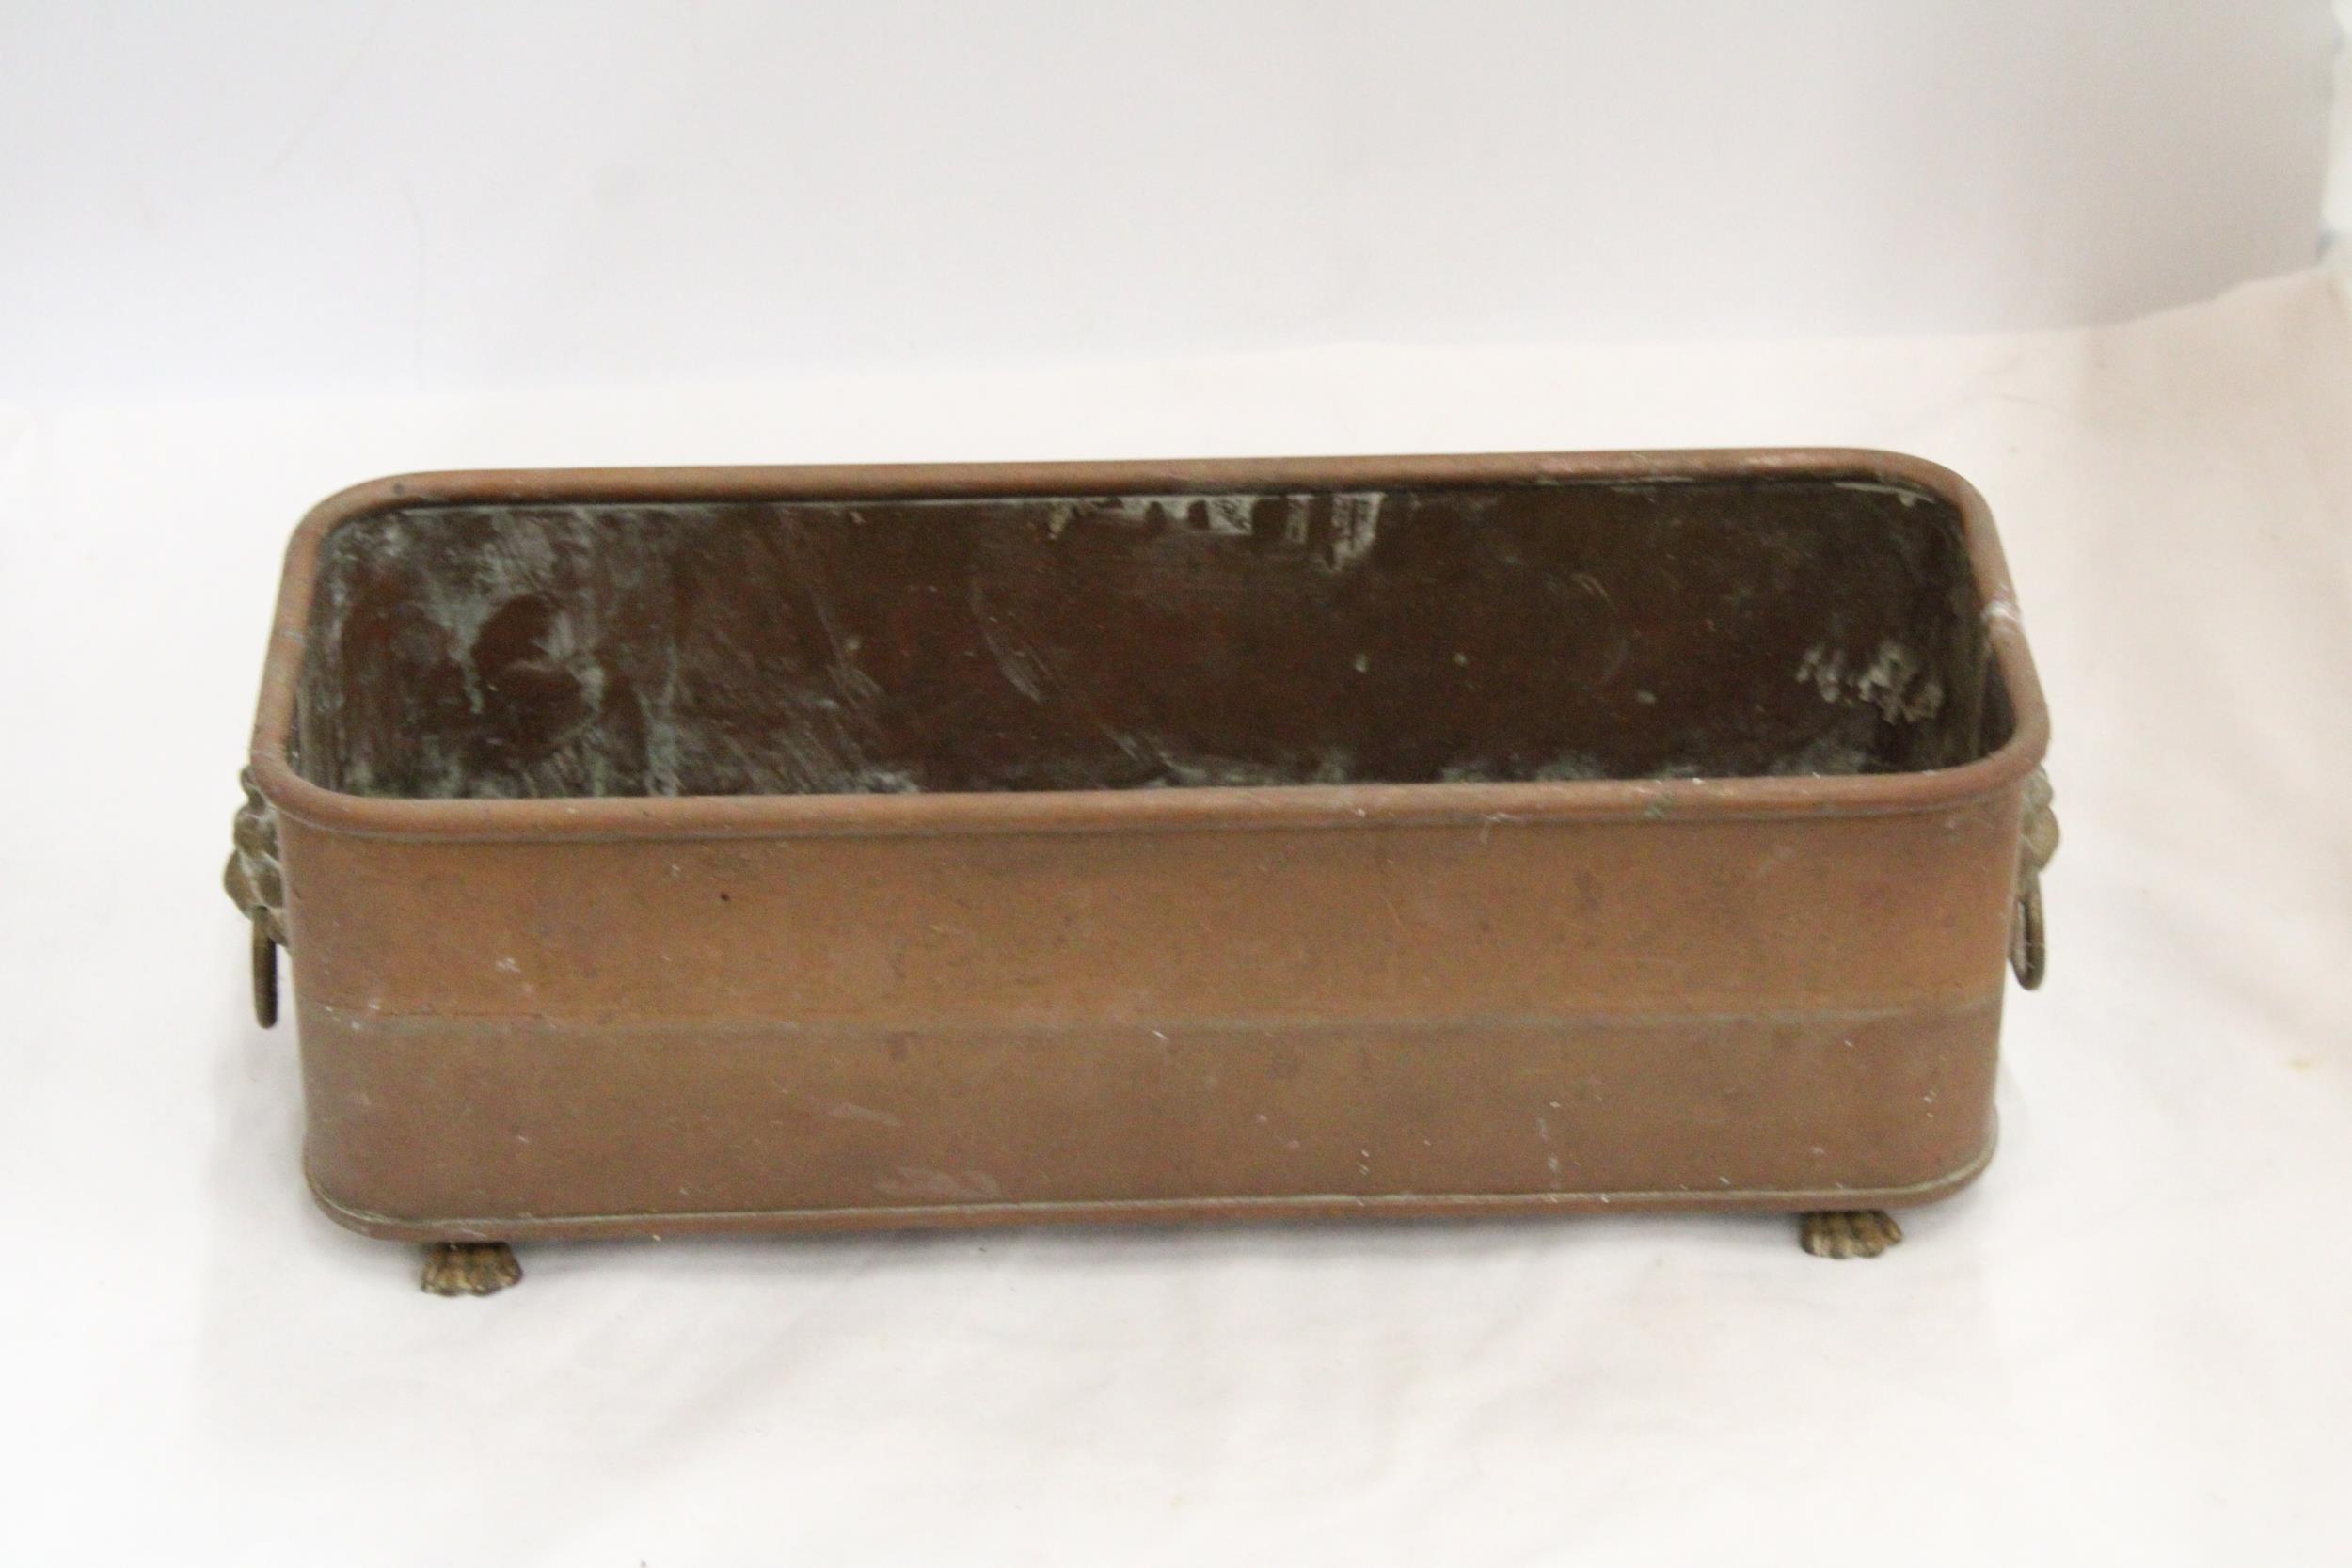 A VINTAGE COPPER PLANTER WITH LIONS HEAD HANDLES AND FEET - Image 2 of 5